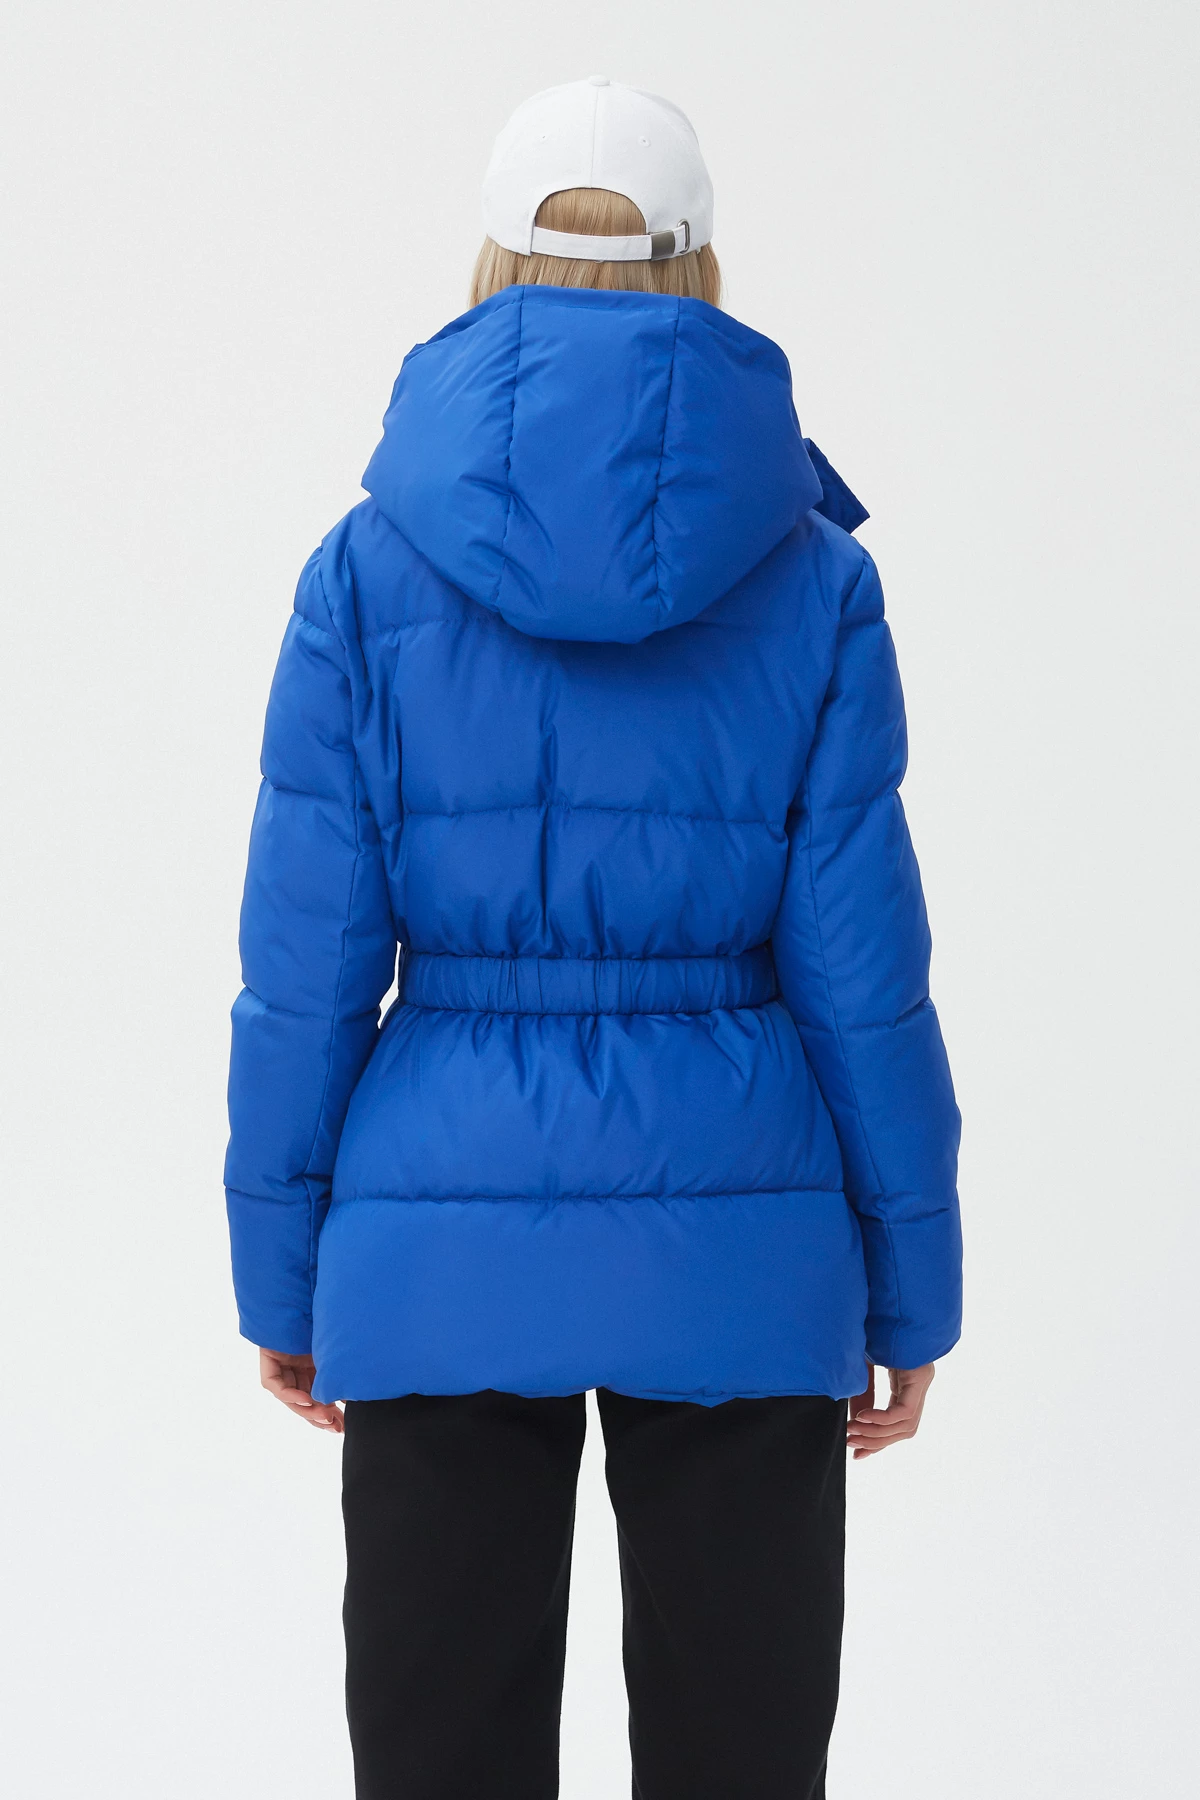 Electric blue jacket with accent waist and insulation, photo 5